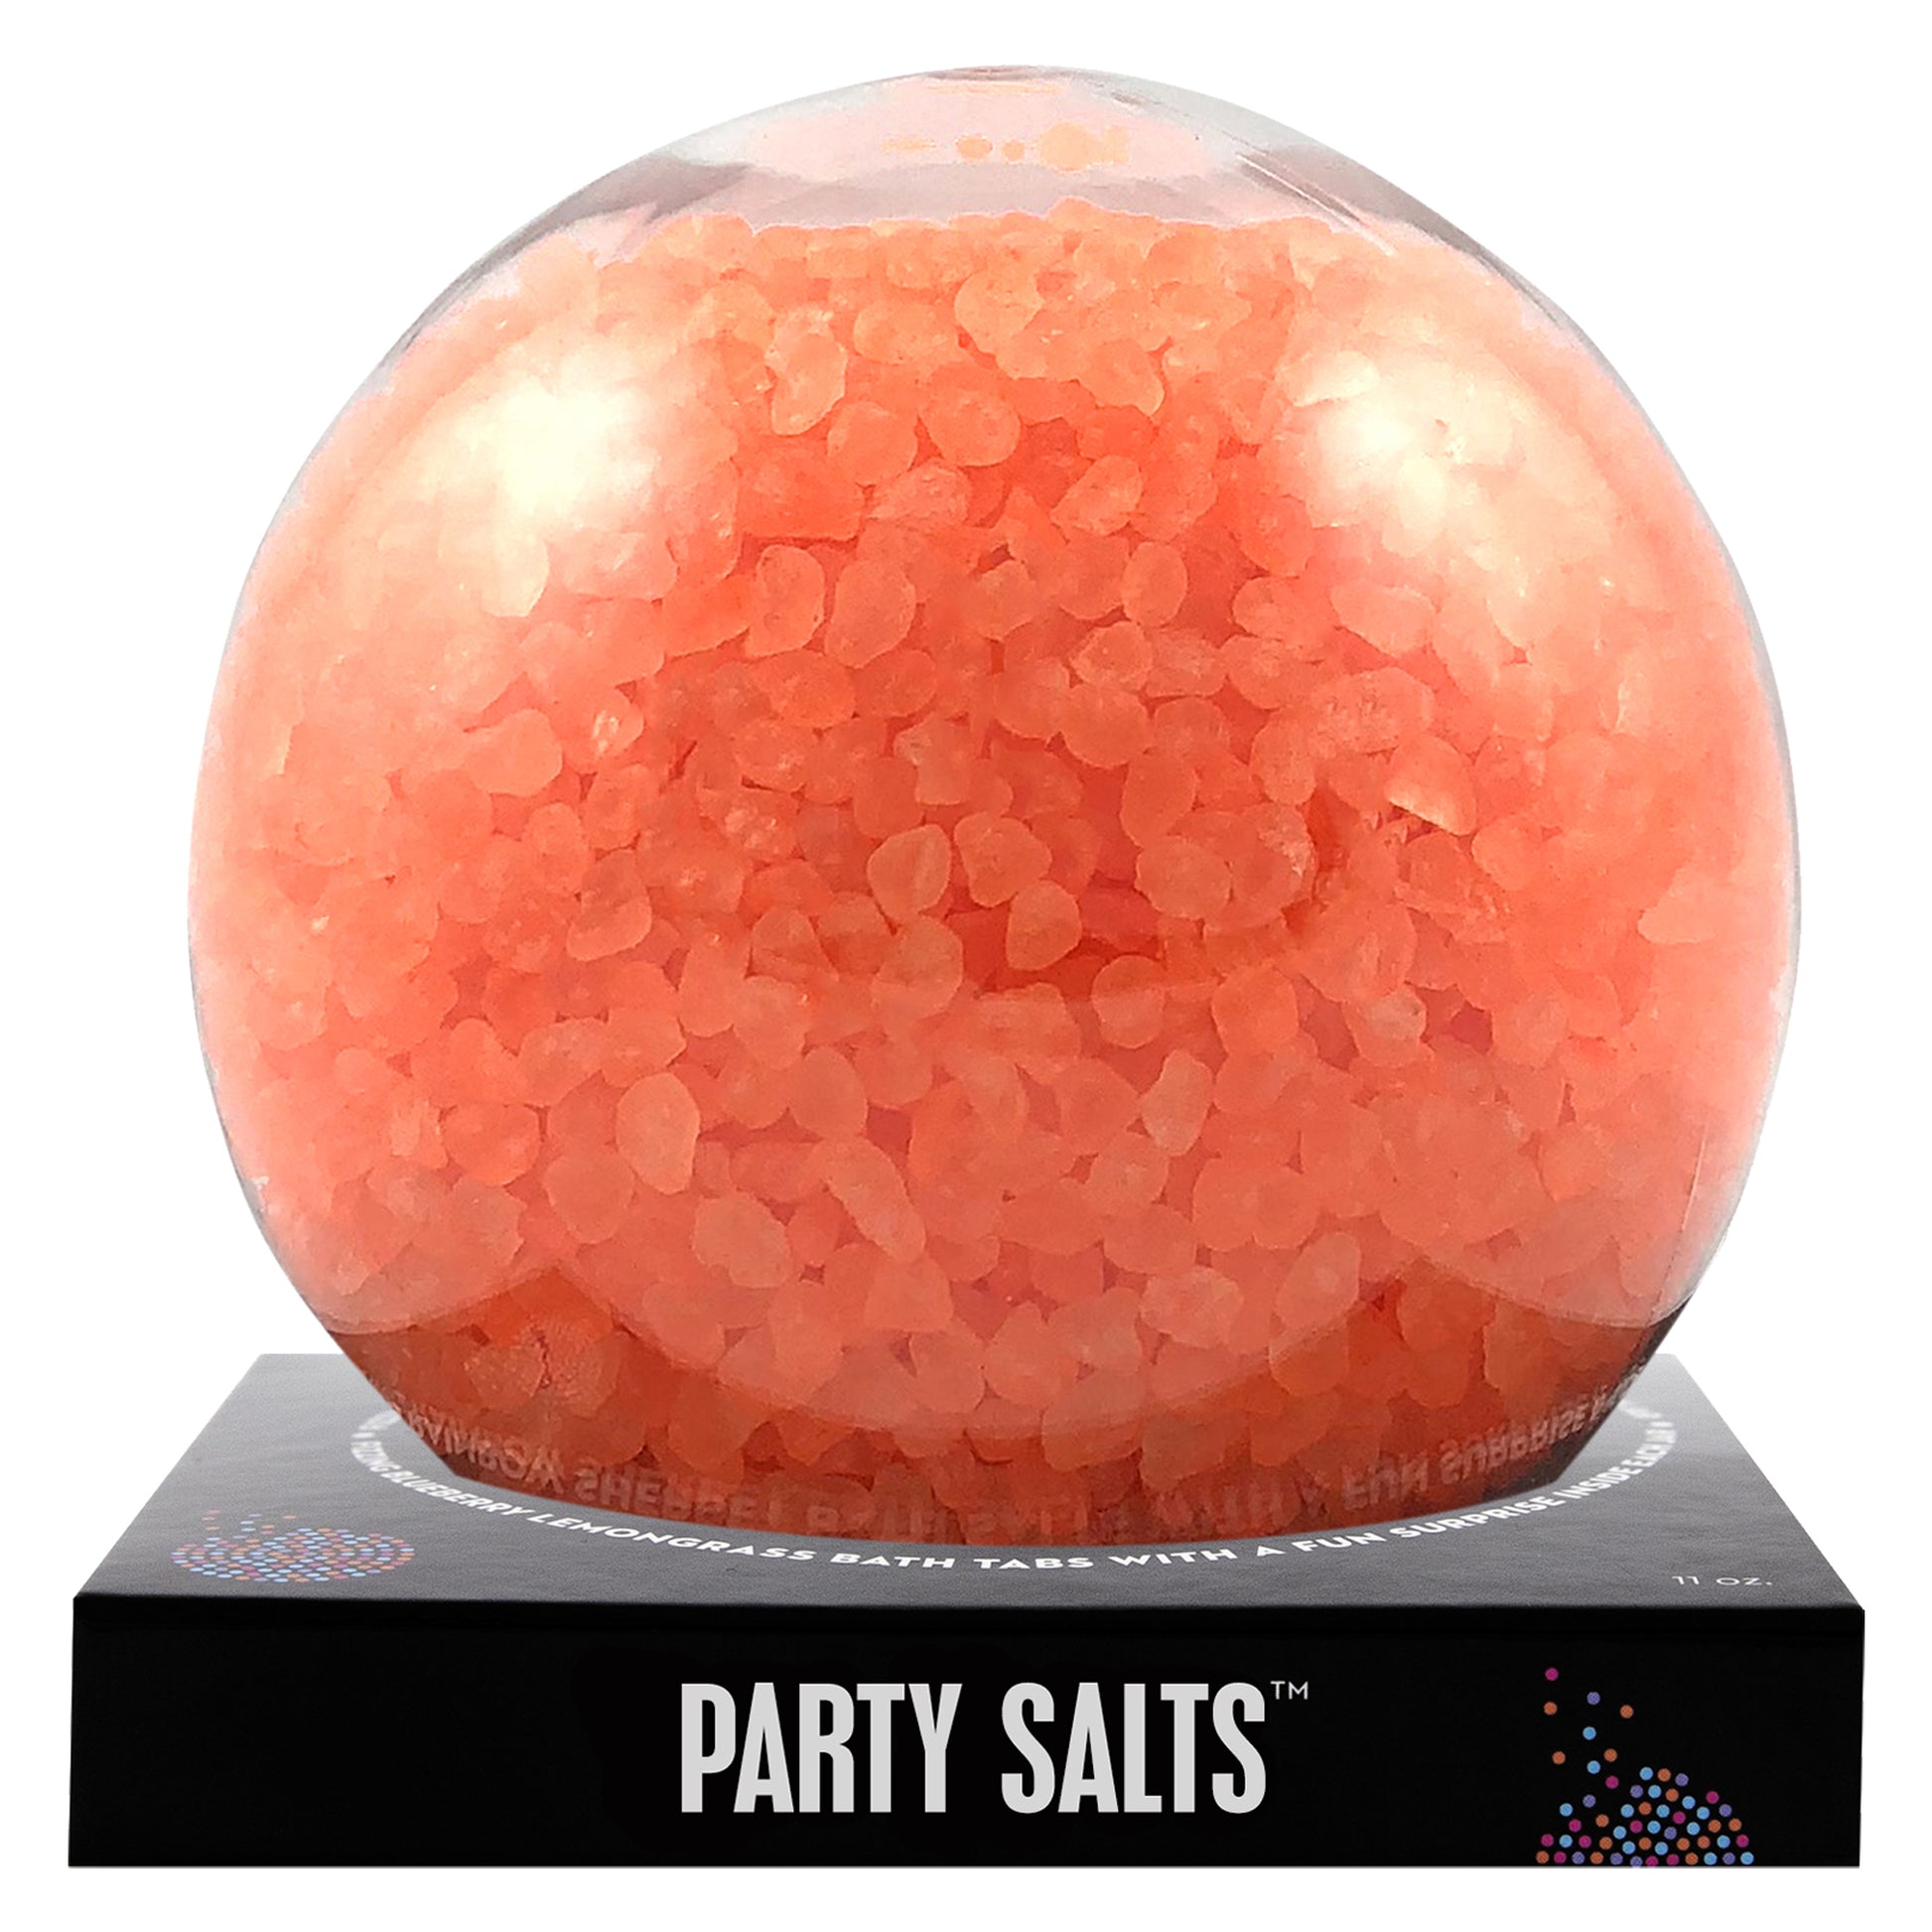 Orange Party Salts with a surprise inside, scented as pineapple.